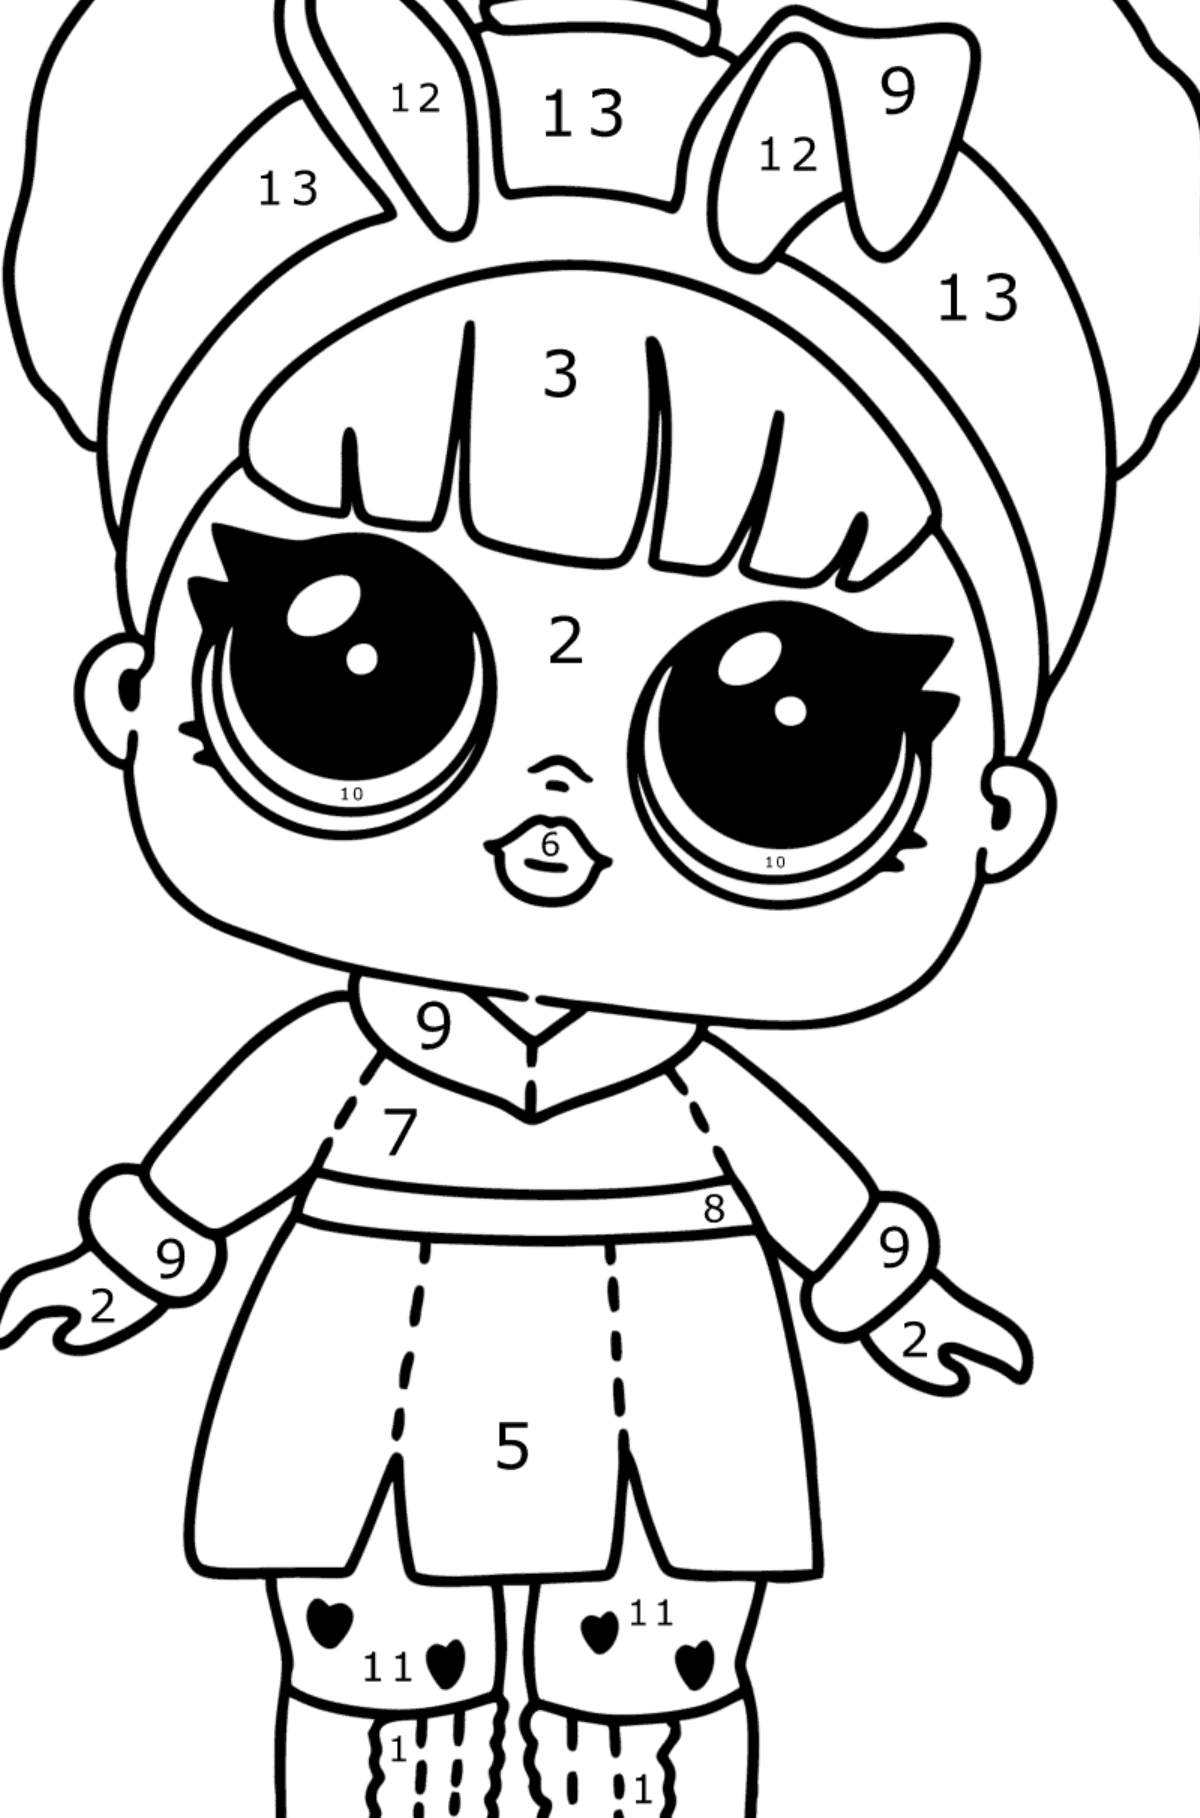 LOL Surprise Snow bunny coloring page - Coloring by Numbers for Kids